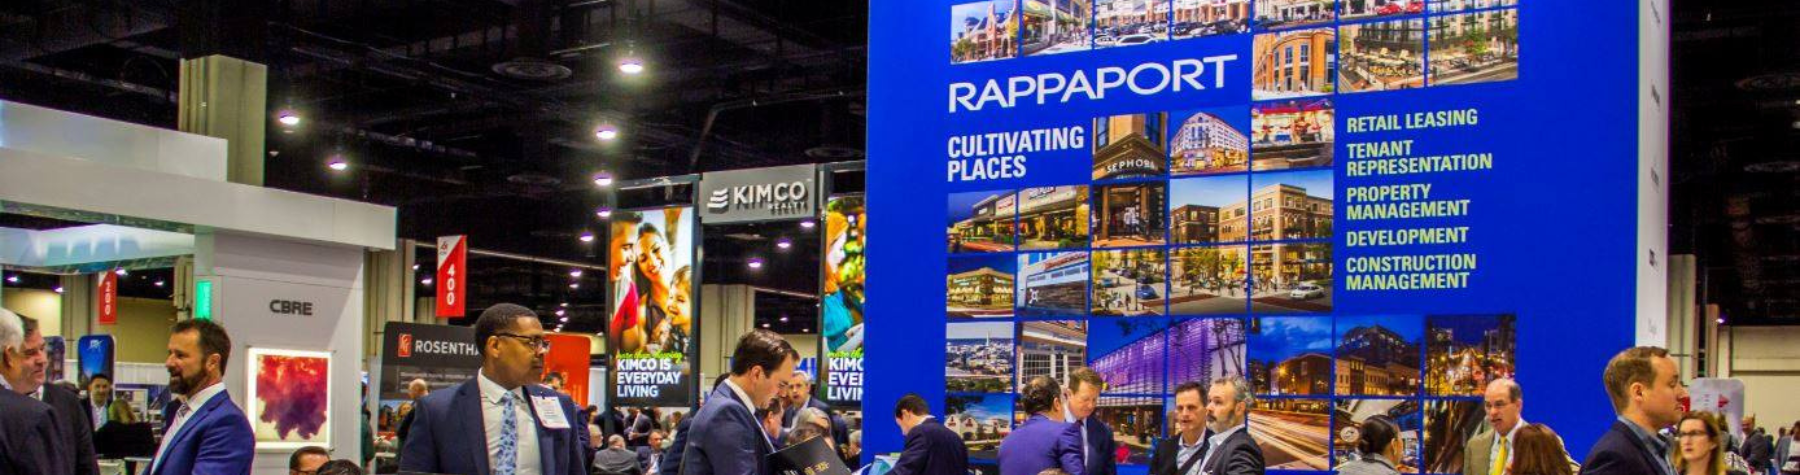 It’s back! Join Rappaport at ICSC Mid-Atlantic this September.